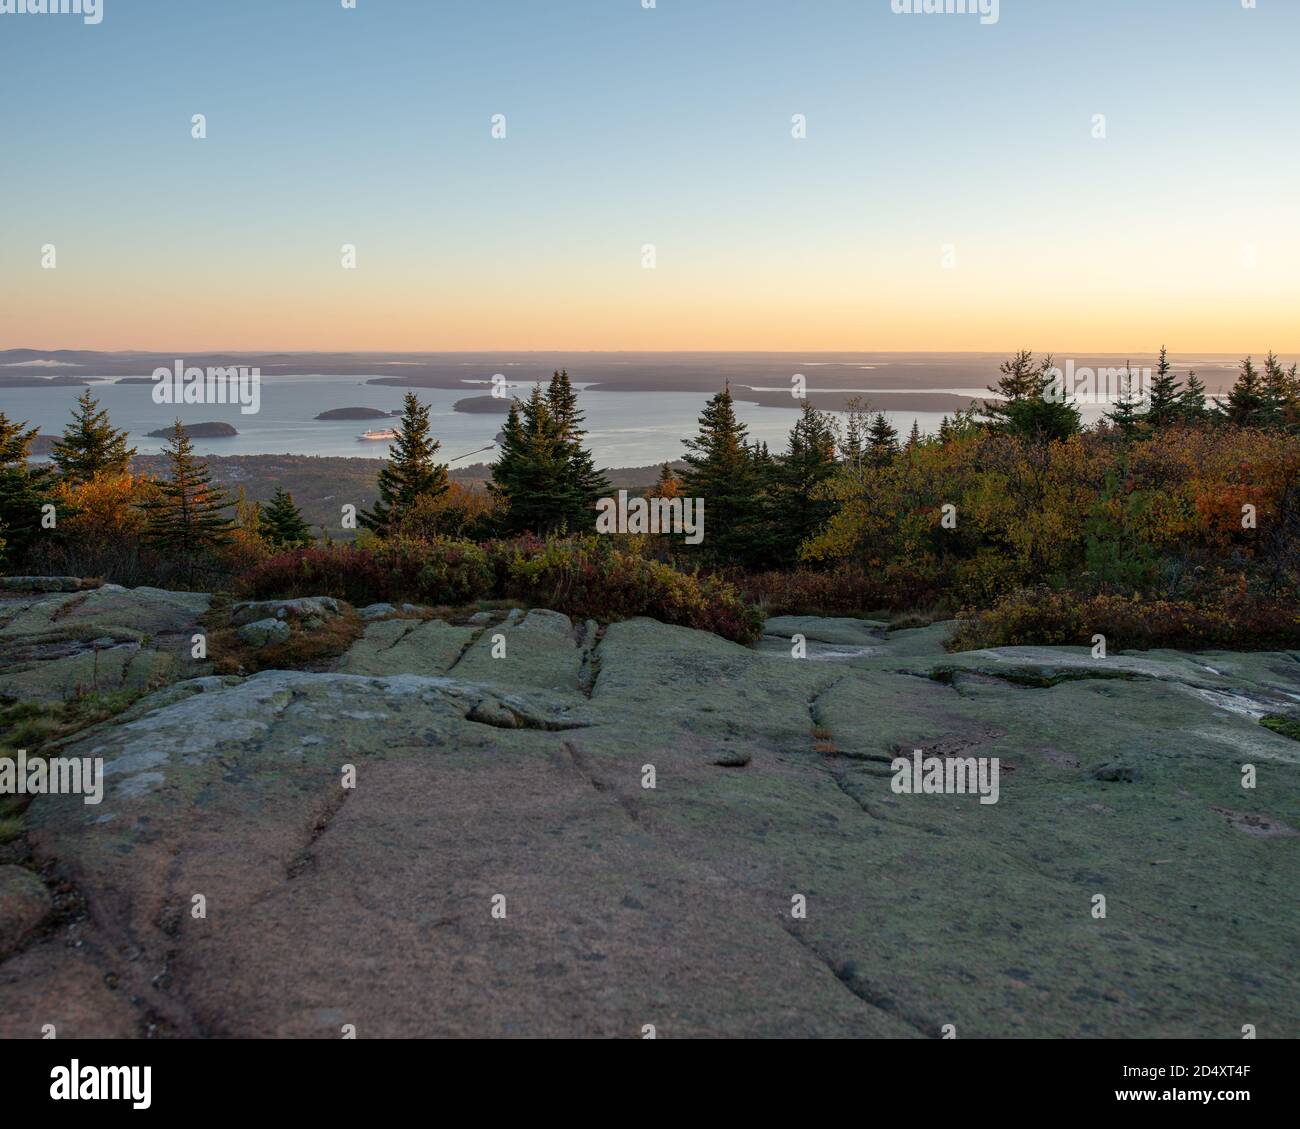 Cadillac Mountain in Acadia National Park Maine during Sunrise, with fall foliage. Stock Photo